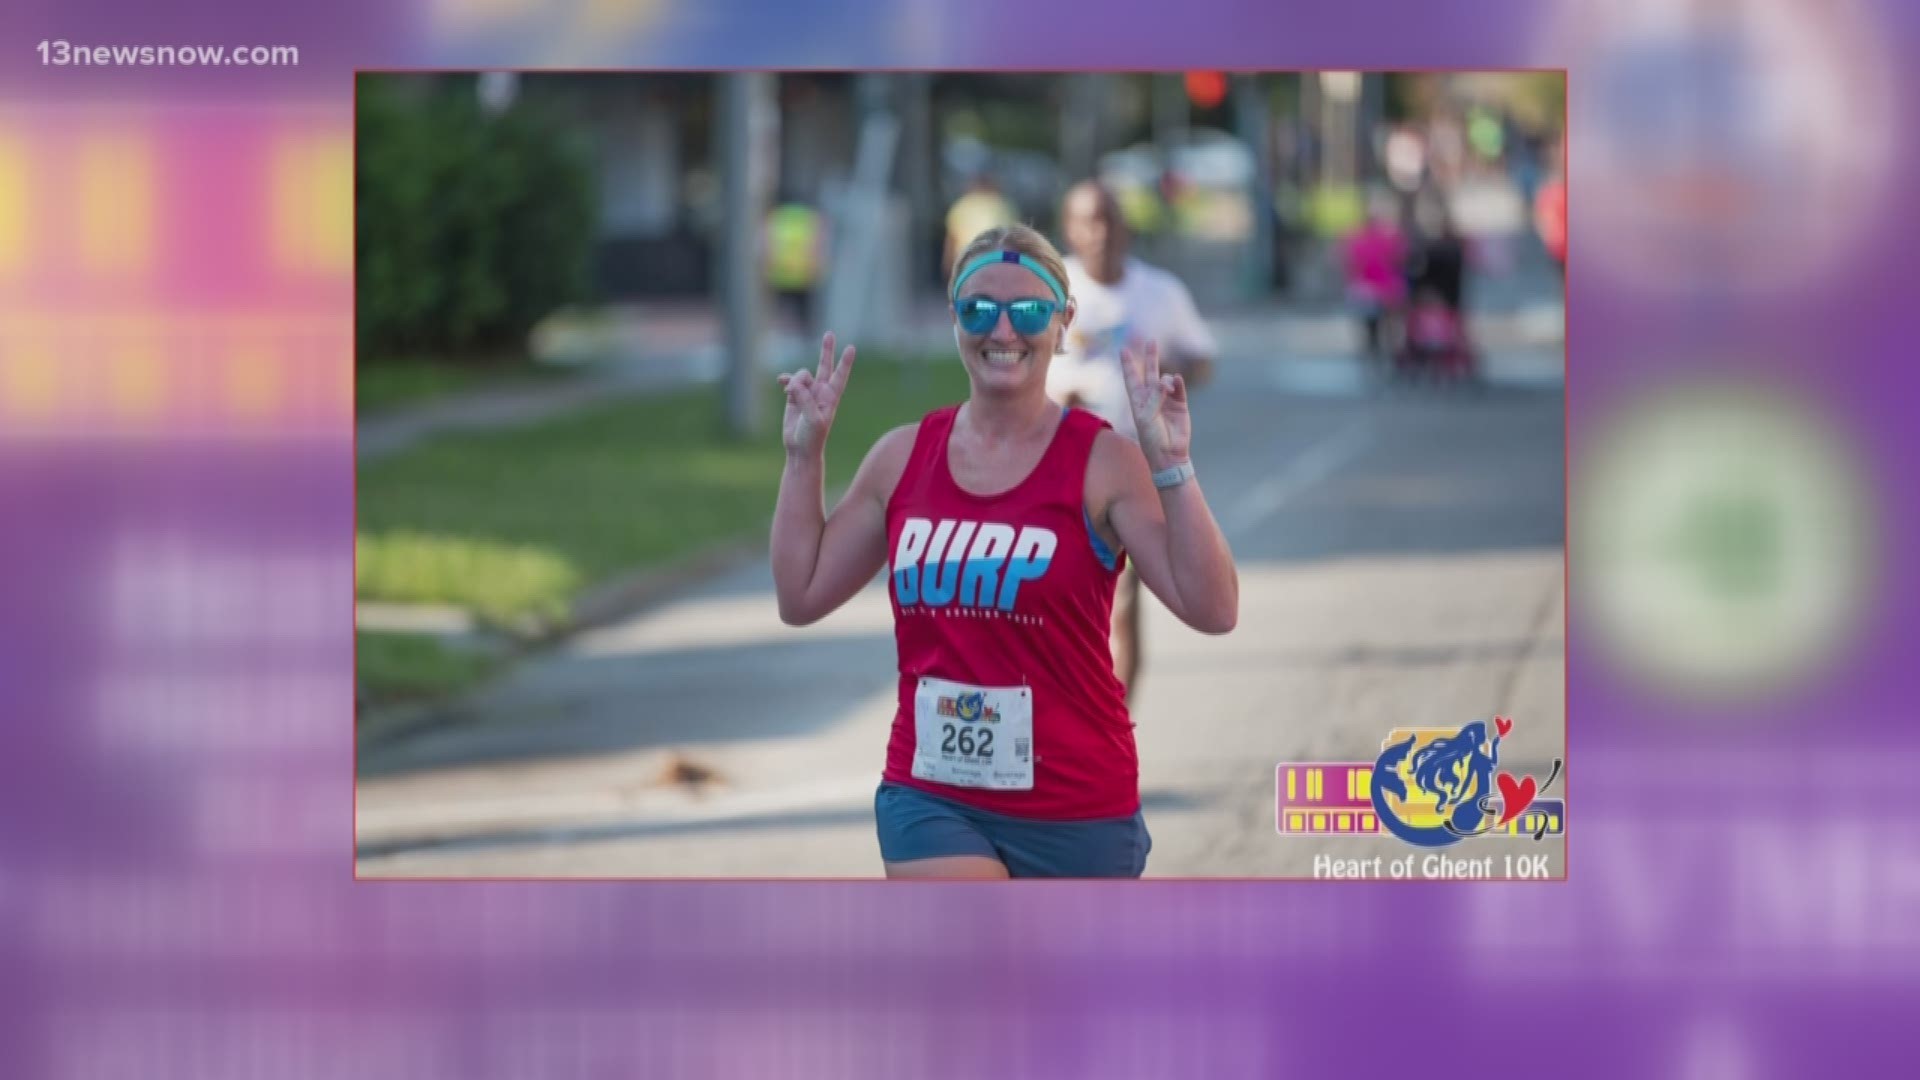 The Heart of Ghent 10K will take place on September 21! Runners will run past restaurants, shops, beautiful neighborhoods, and it's all for a good cause.